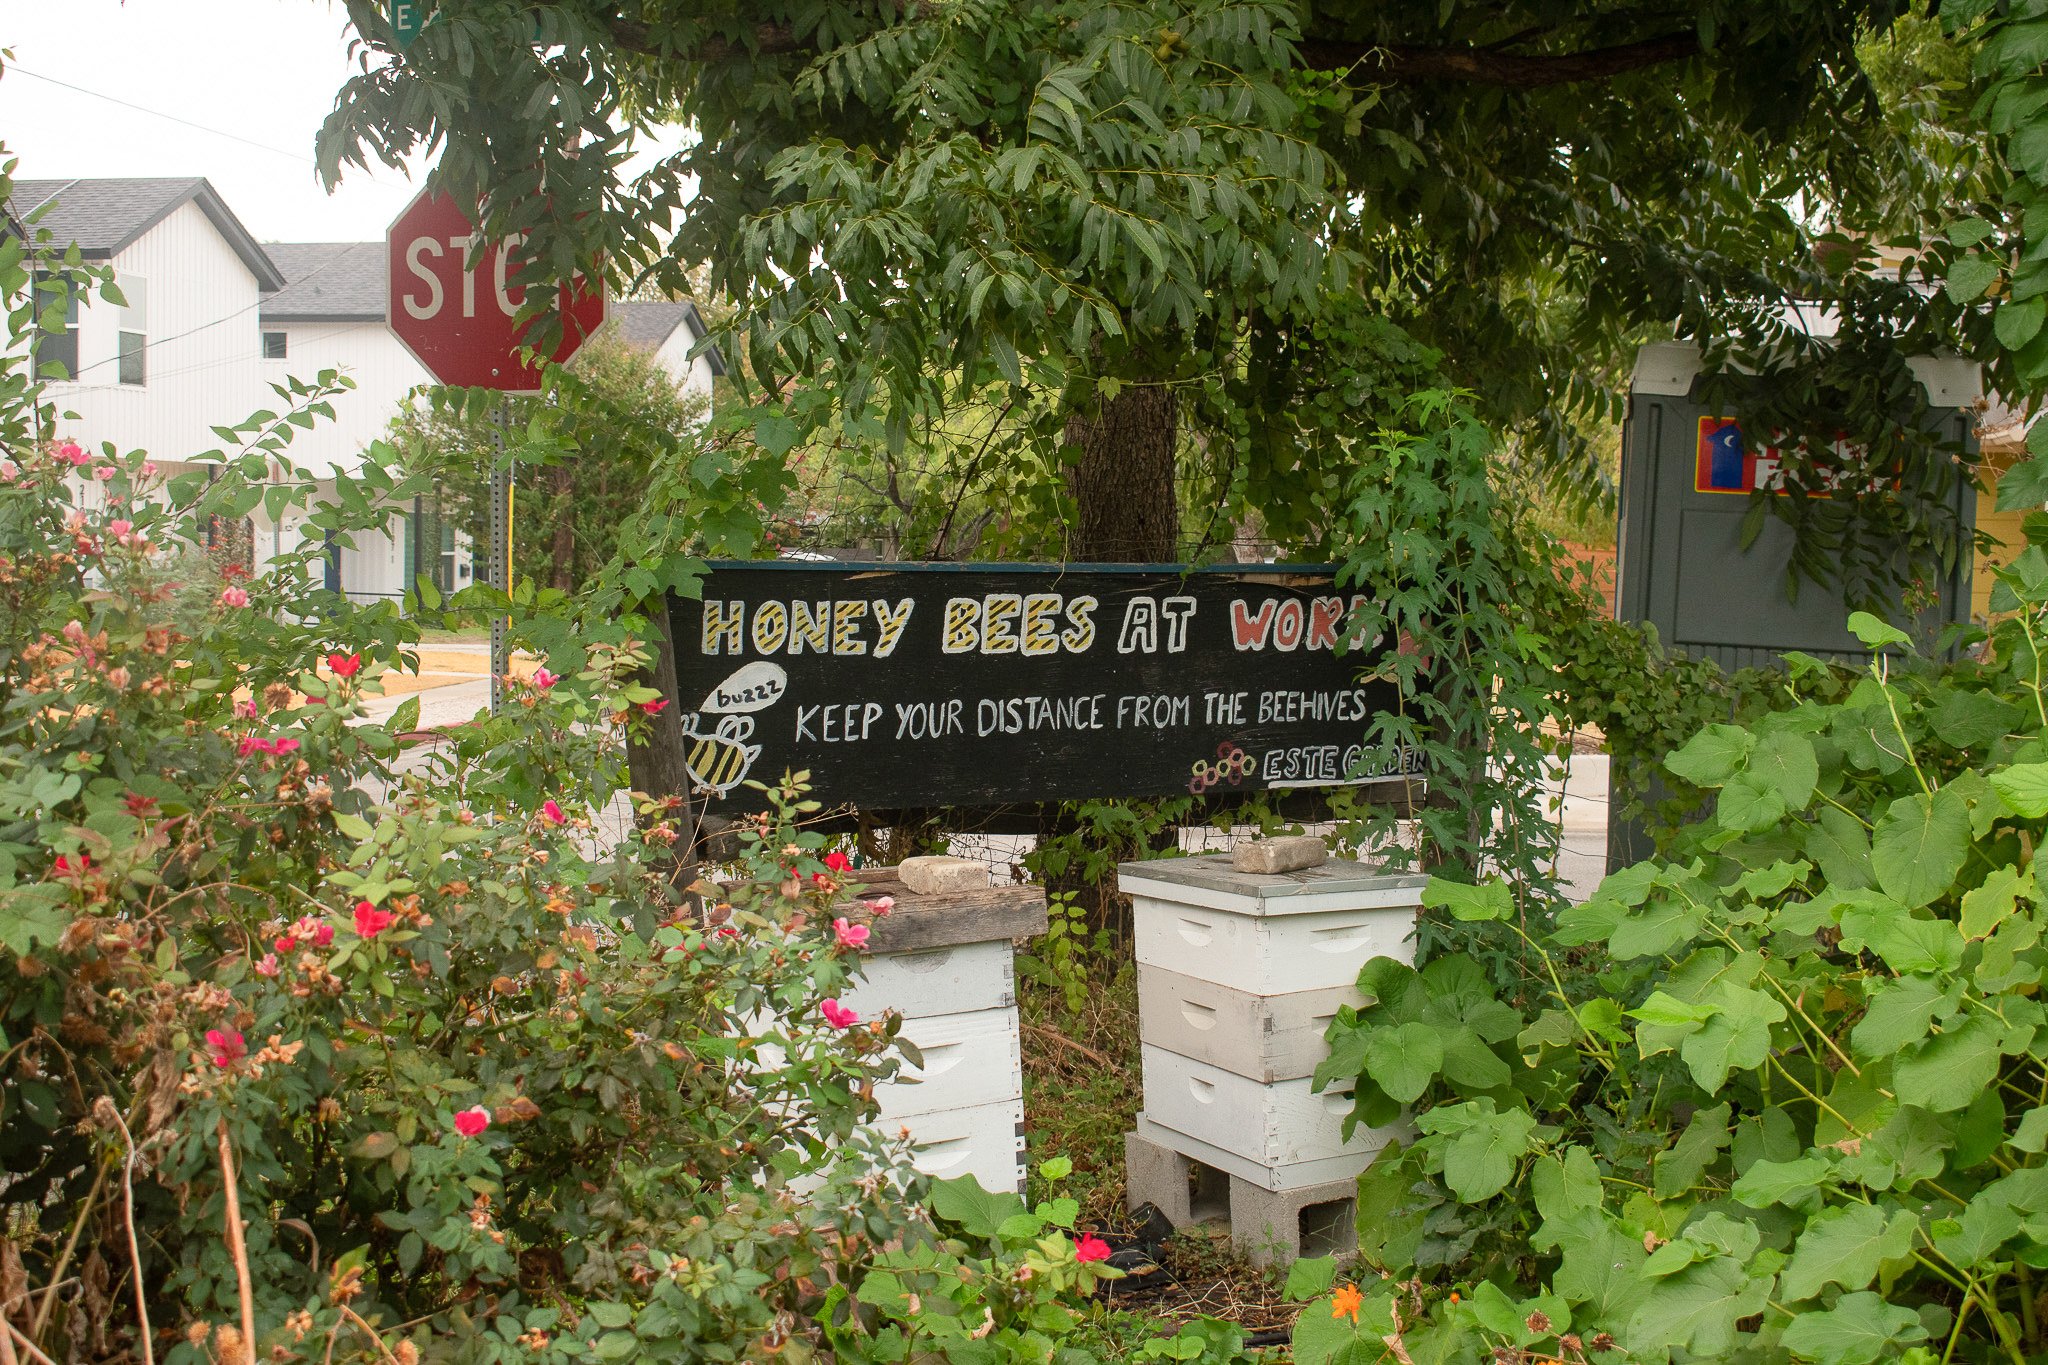   With the help of    Two Hives Honey   , bees pollinate the garden Sept. 13. Gutierrez says that the garden is a green haven for life: birds, bees, bugs, plants and people.  